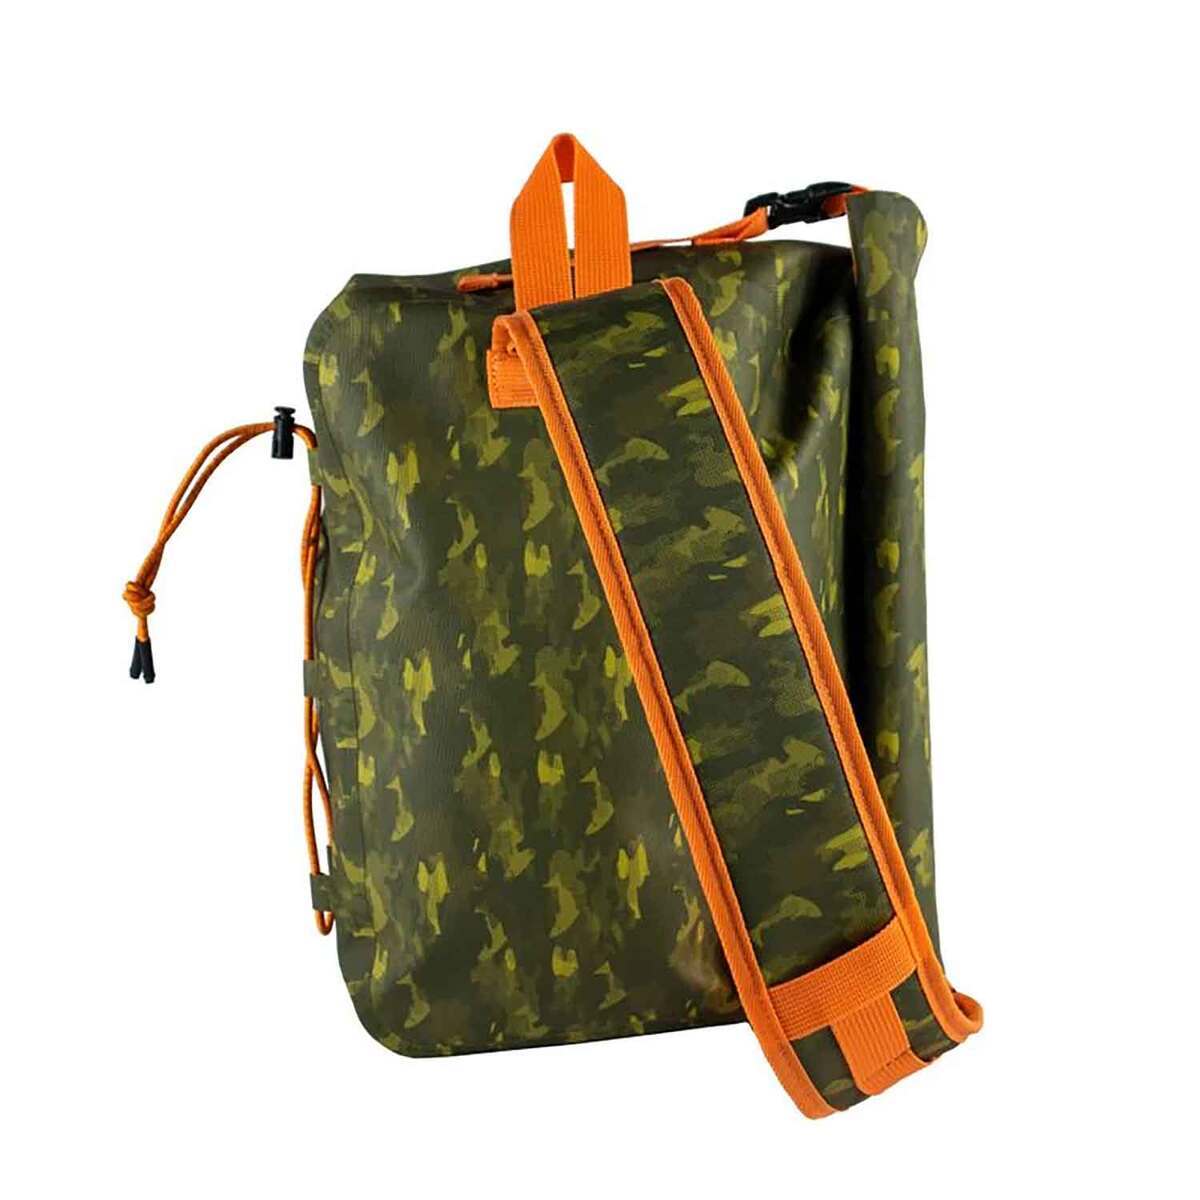 Chums Rolltop Sling Pack | Sportsman's Warehouse